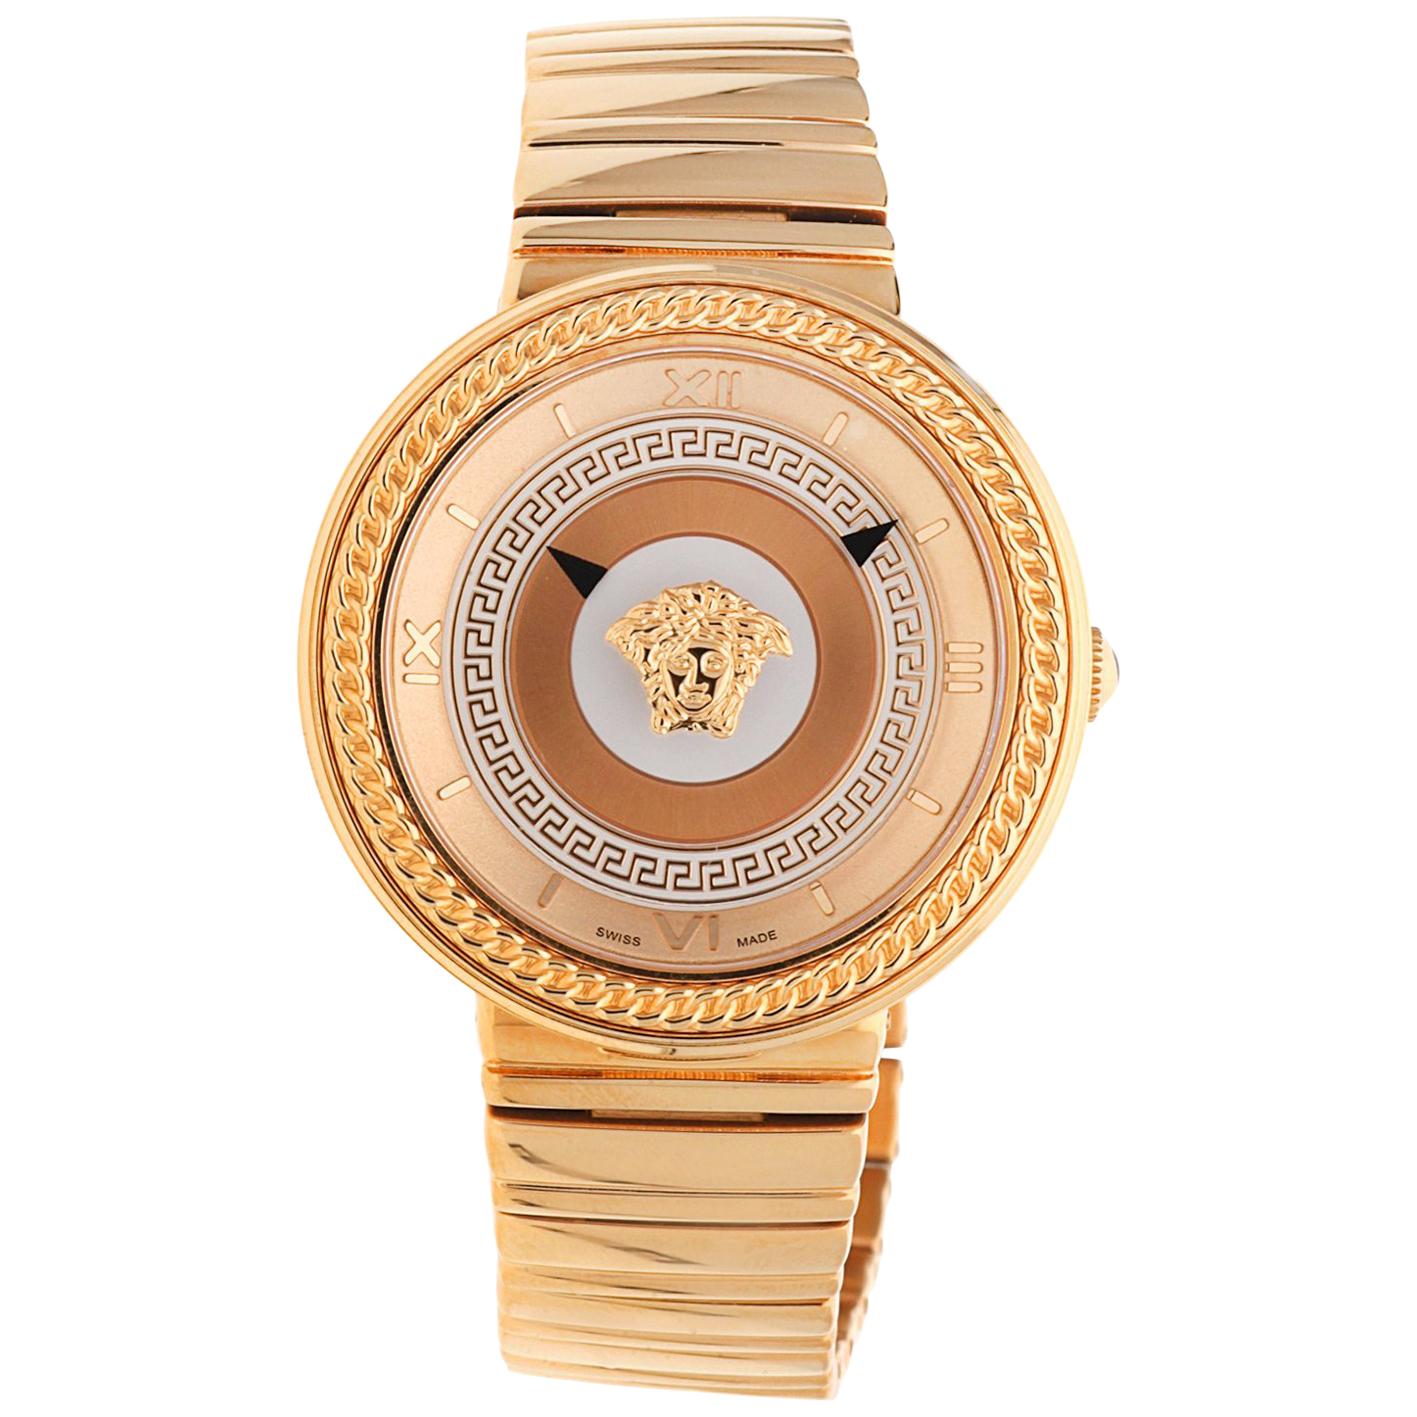 Versace Women Watch V-METAL ICON pink gold VLC100014 For Sale